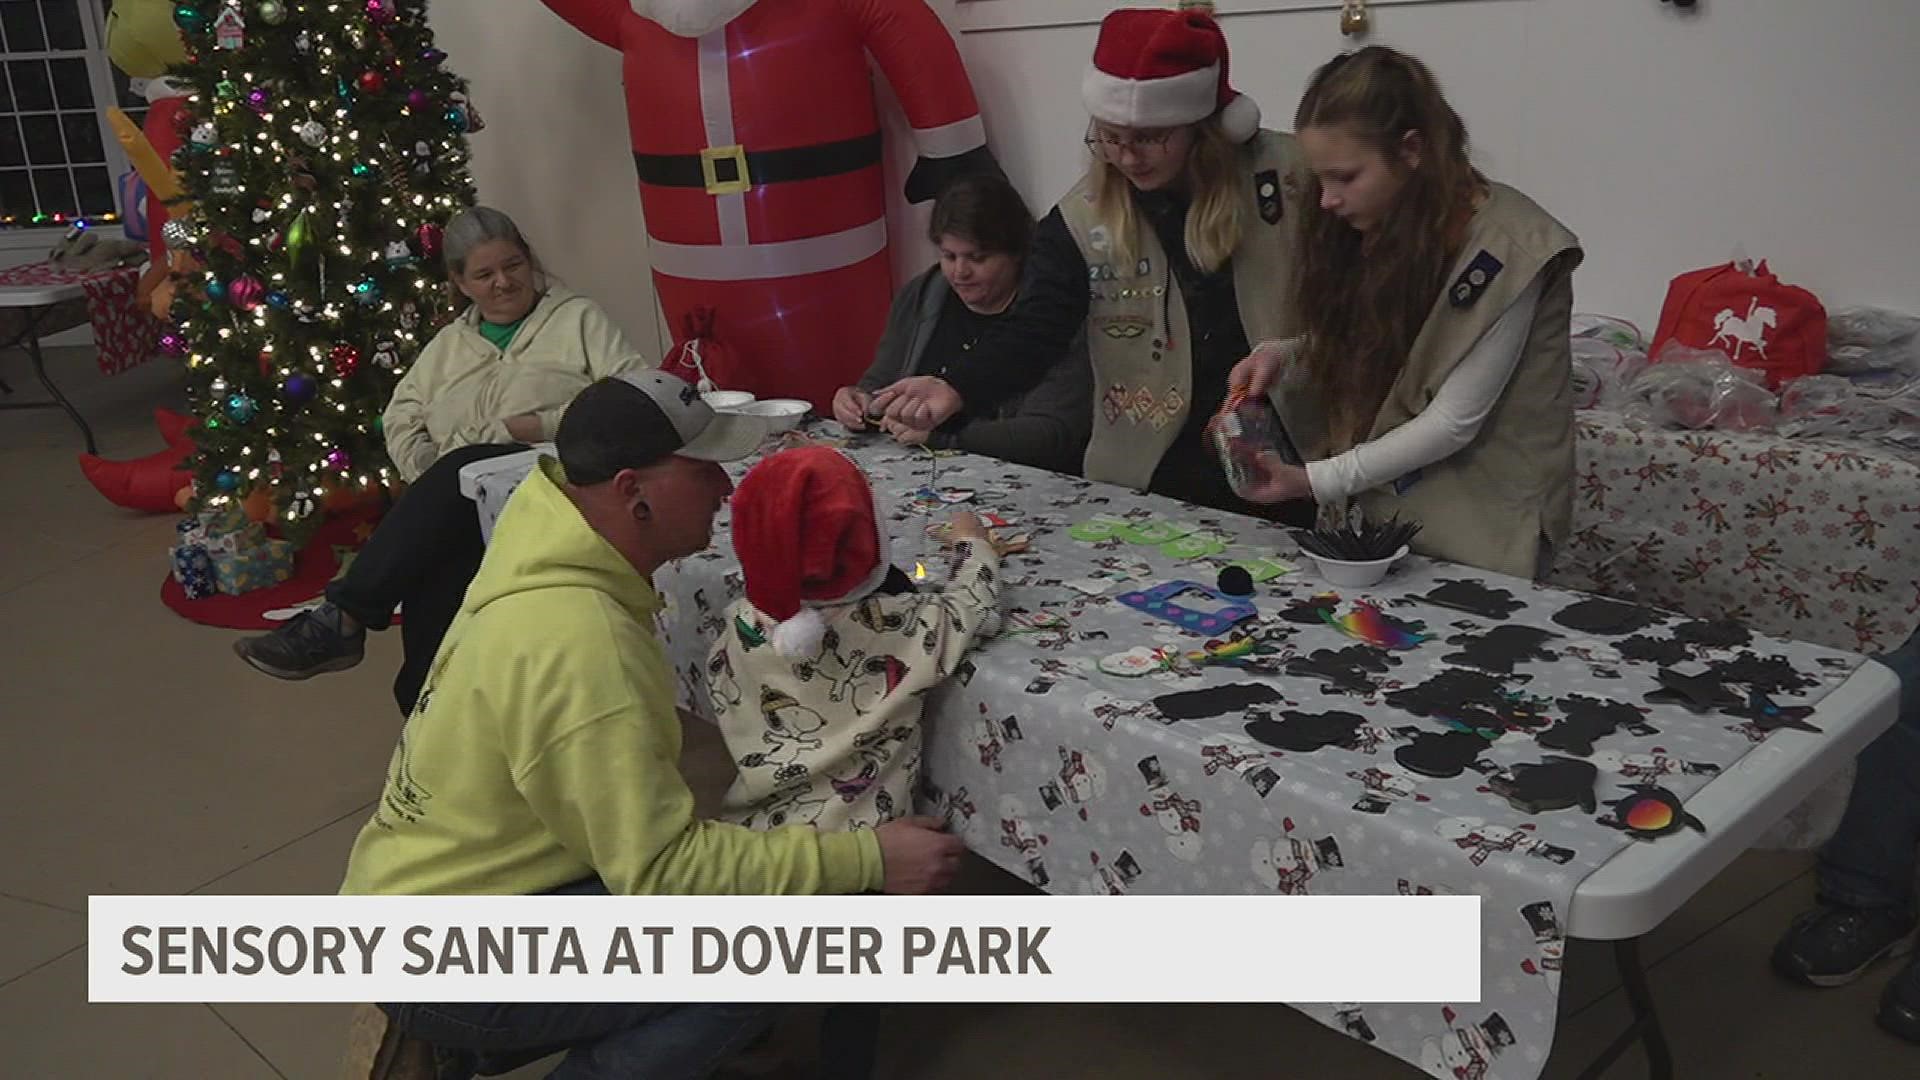 The holiday hustle and bustle can be overwhelming for anyone, but especially for kids living with a disability. A new event offers quieter festivities and lights.